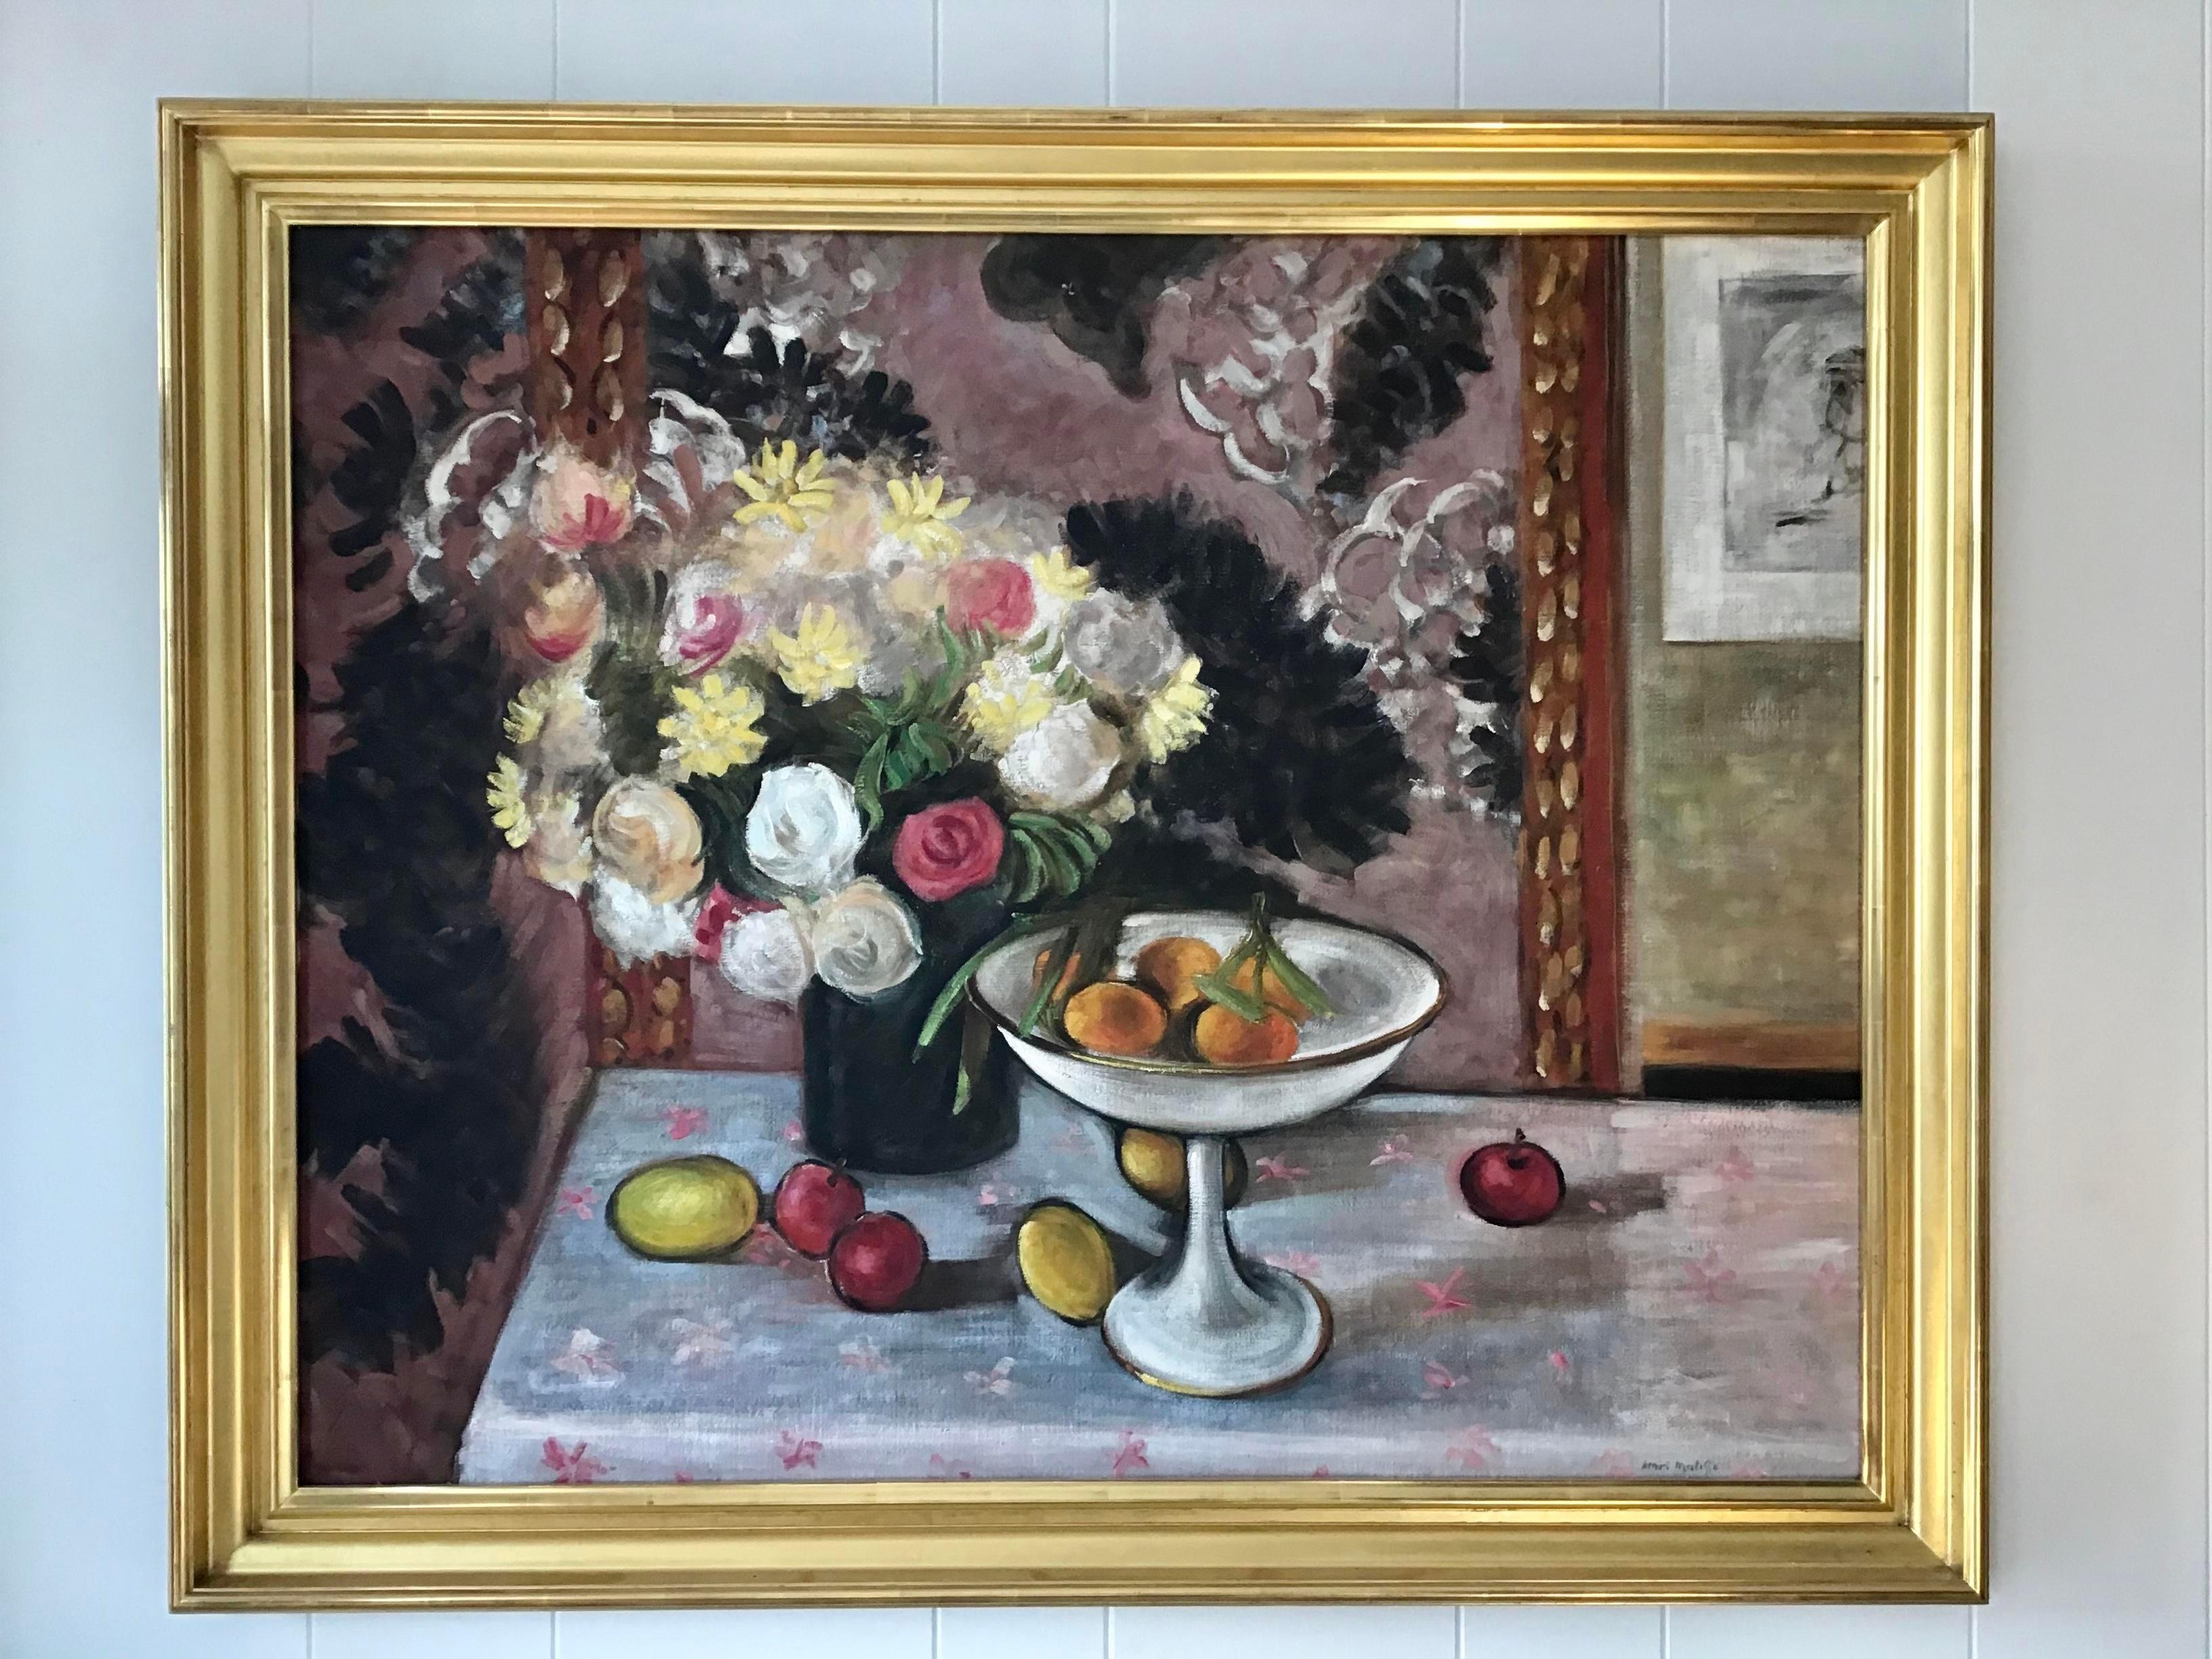 Very large still life painting in the style of Henri Matisse. Wonderful gold frame. Add some drama to your interior.